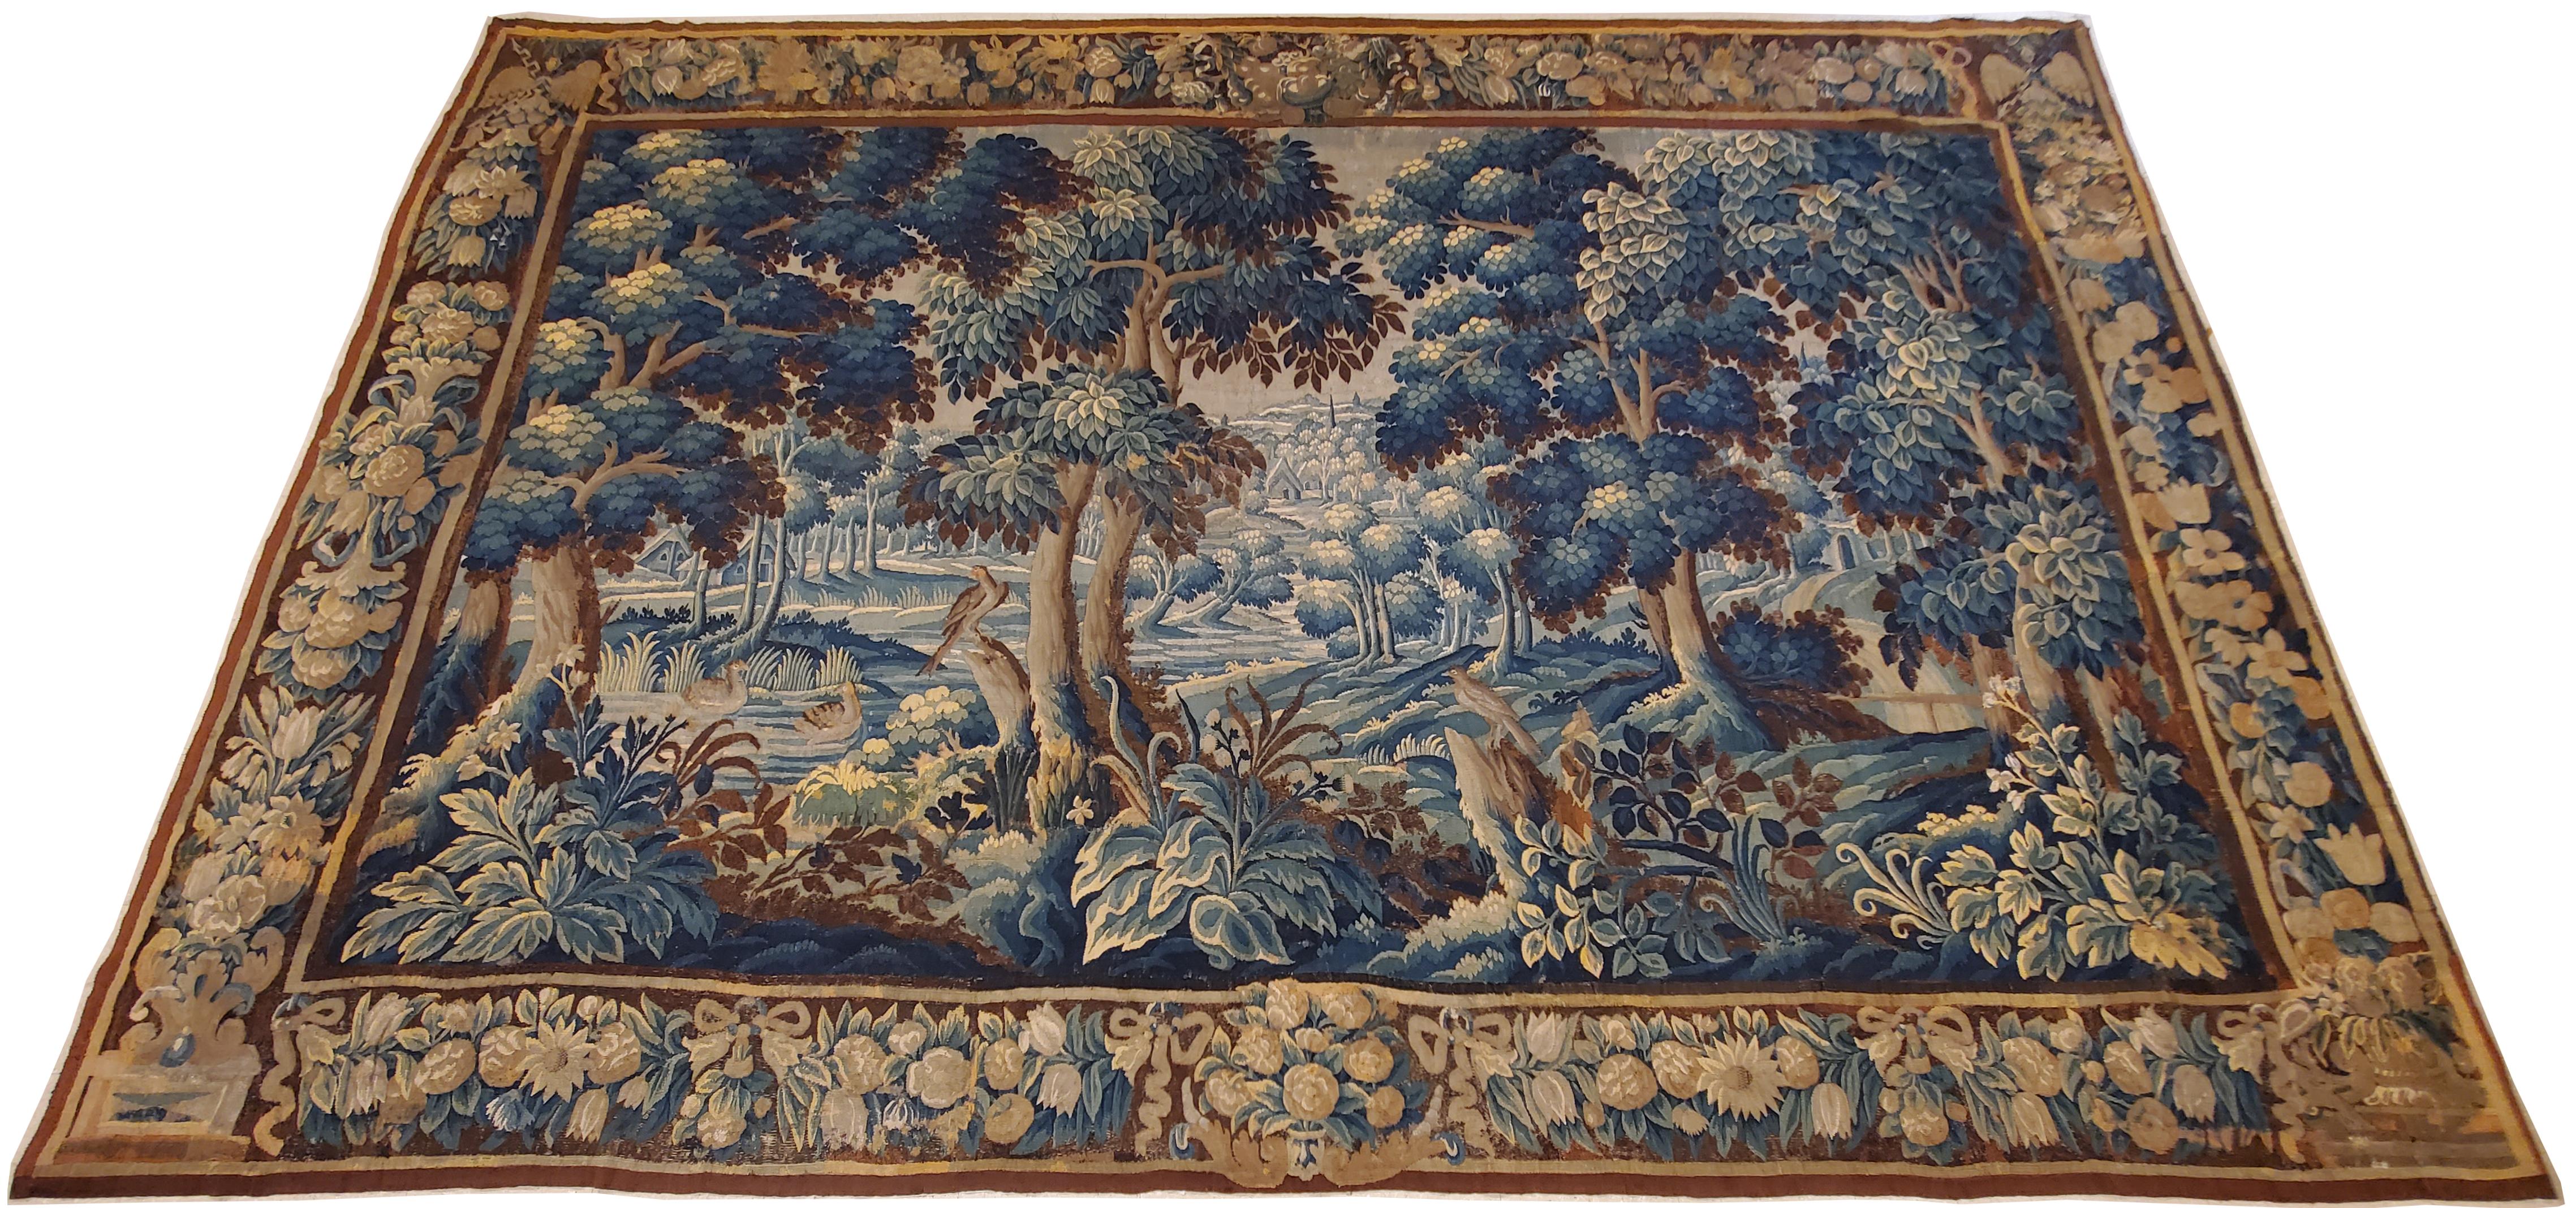 Large Flemish verdure tapestry from the 17th century, featuring a tranquil scene in a woodland setting, with stately trees at right and left in the foreground, with an exotic bird resting in the grass beneath their shadow, and further trees in some